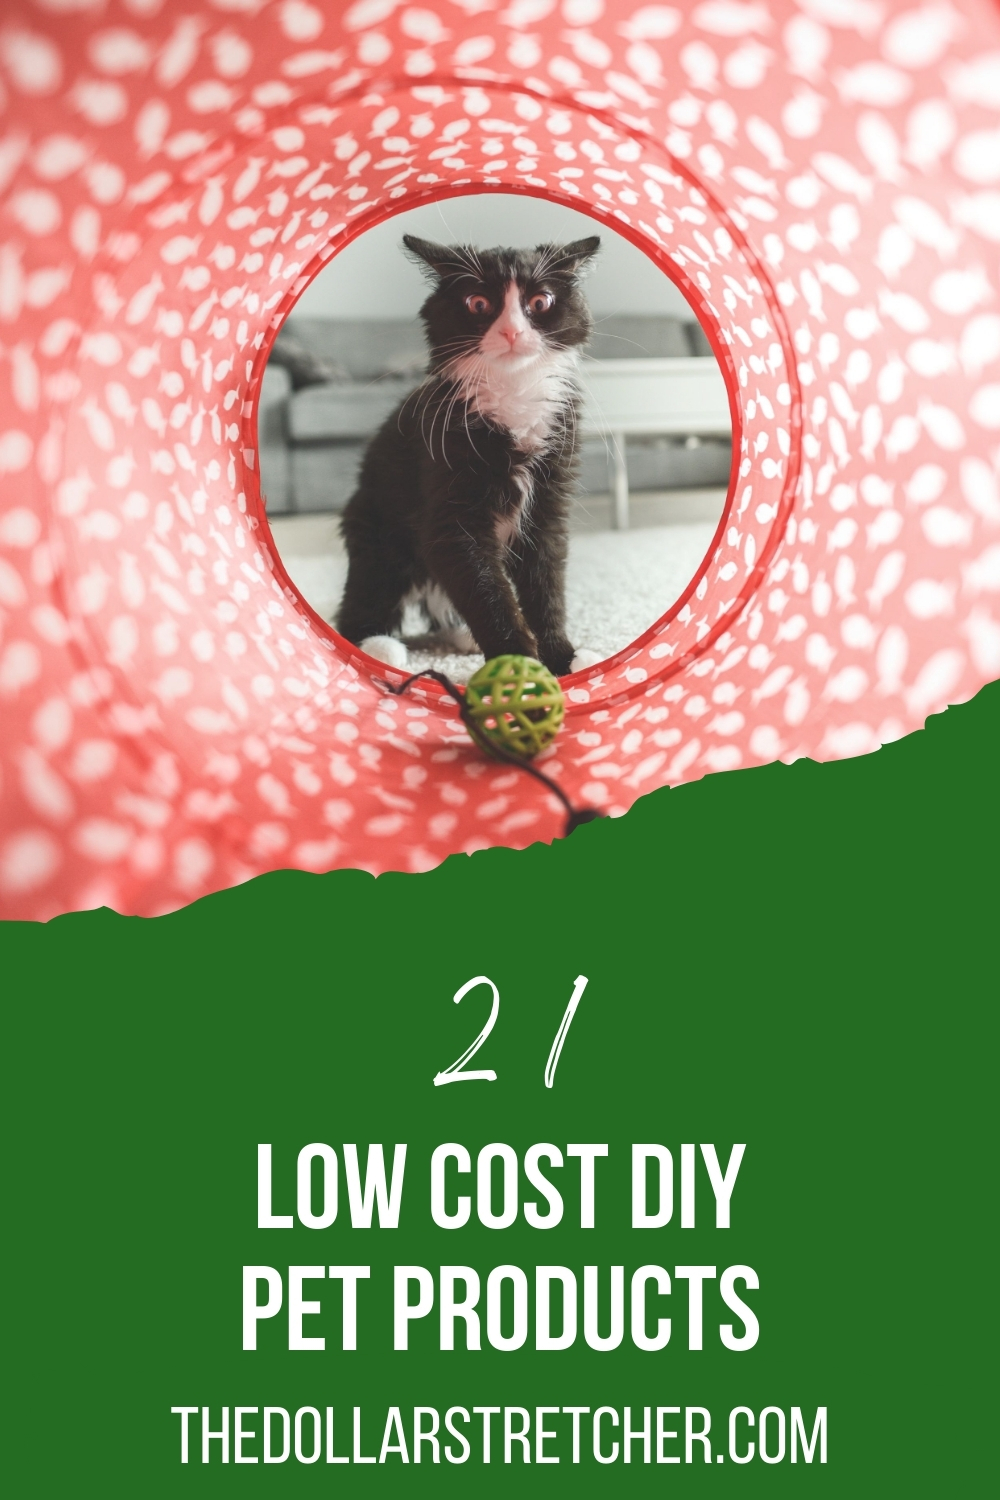 Low Cost DIY Pet Products PIN